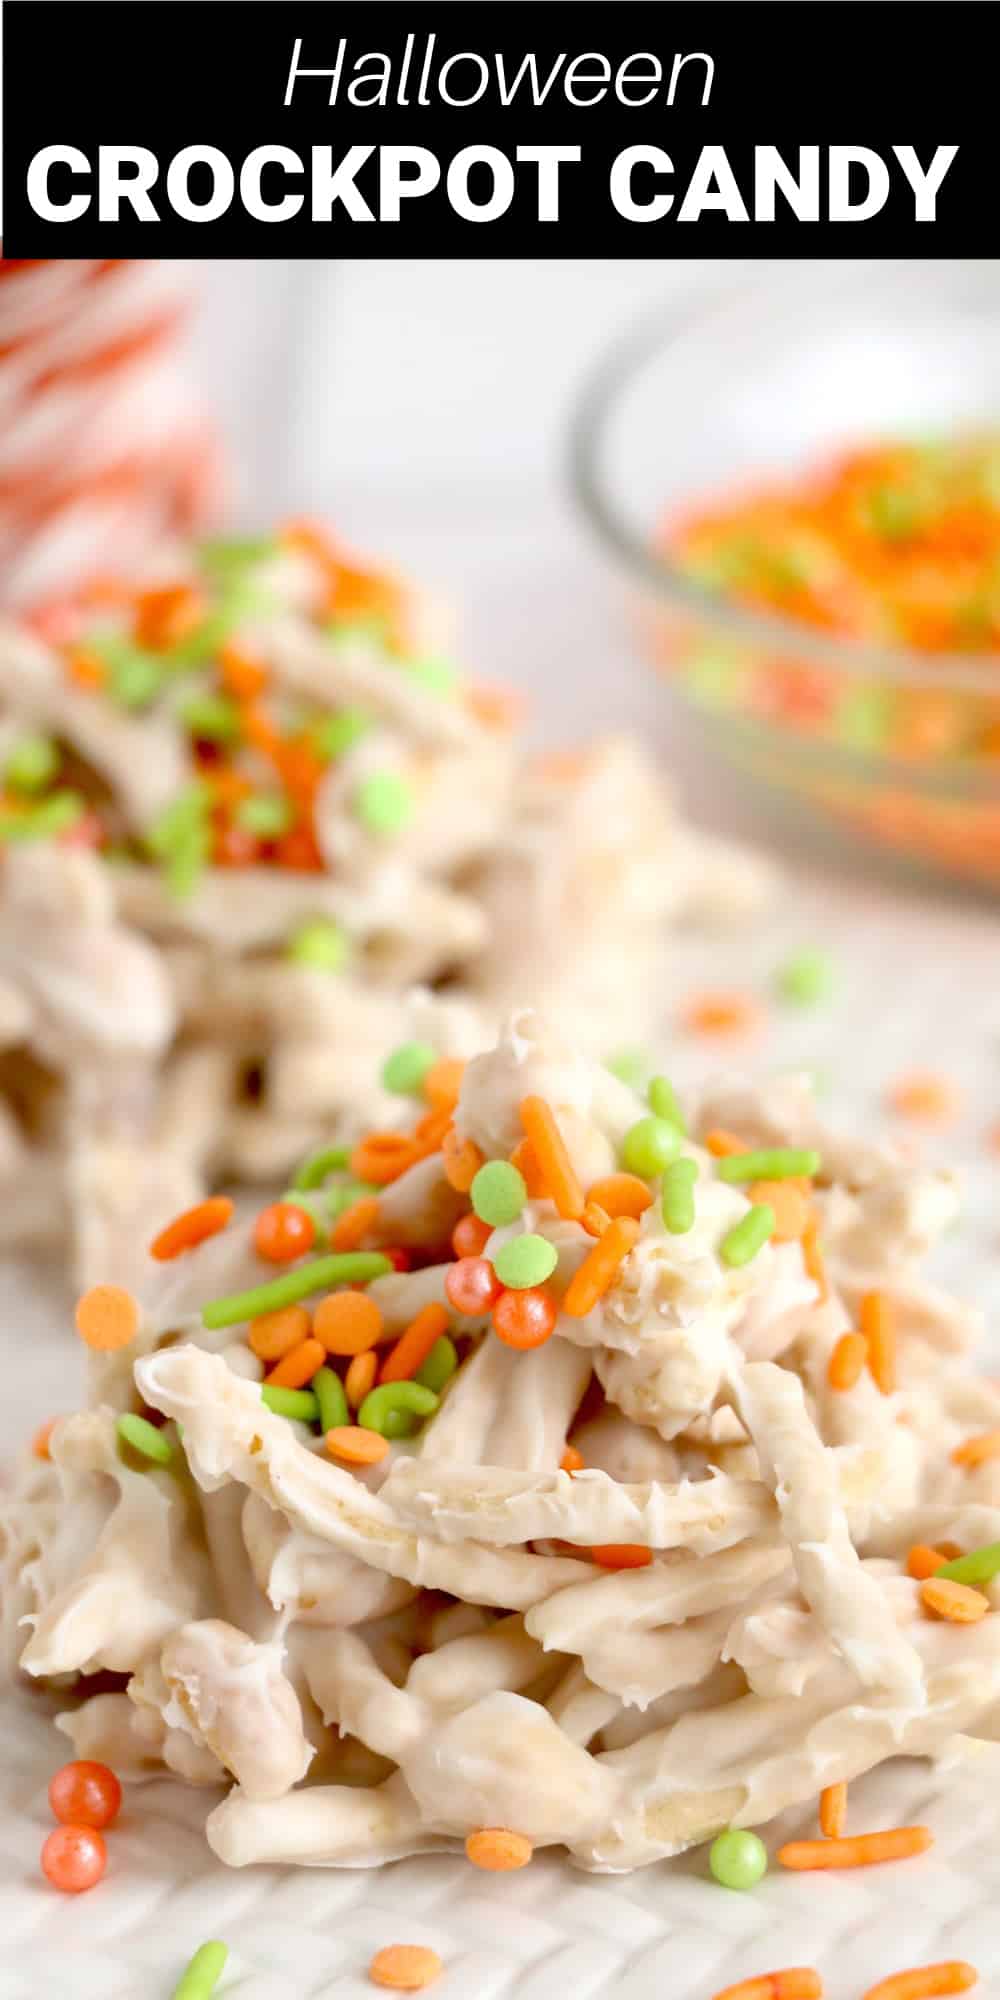 This easy Halloween Crock Pot candy is a simple and delicious party treat that’s so much prettier and tastier than store bought candy. Crunchy chow mein noodles and salty roasted peanuts are covered in sweet and creamy white chocolate, then formed into clusters and decorated with festive Halloween sprinkles. 